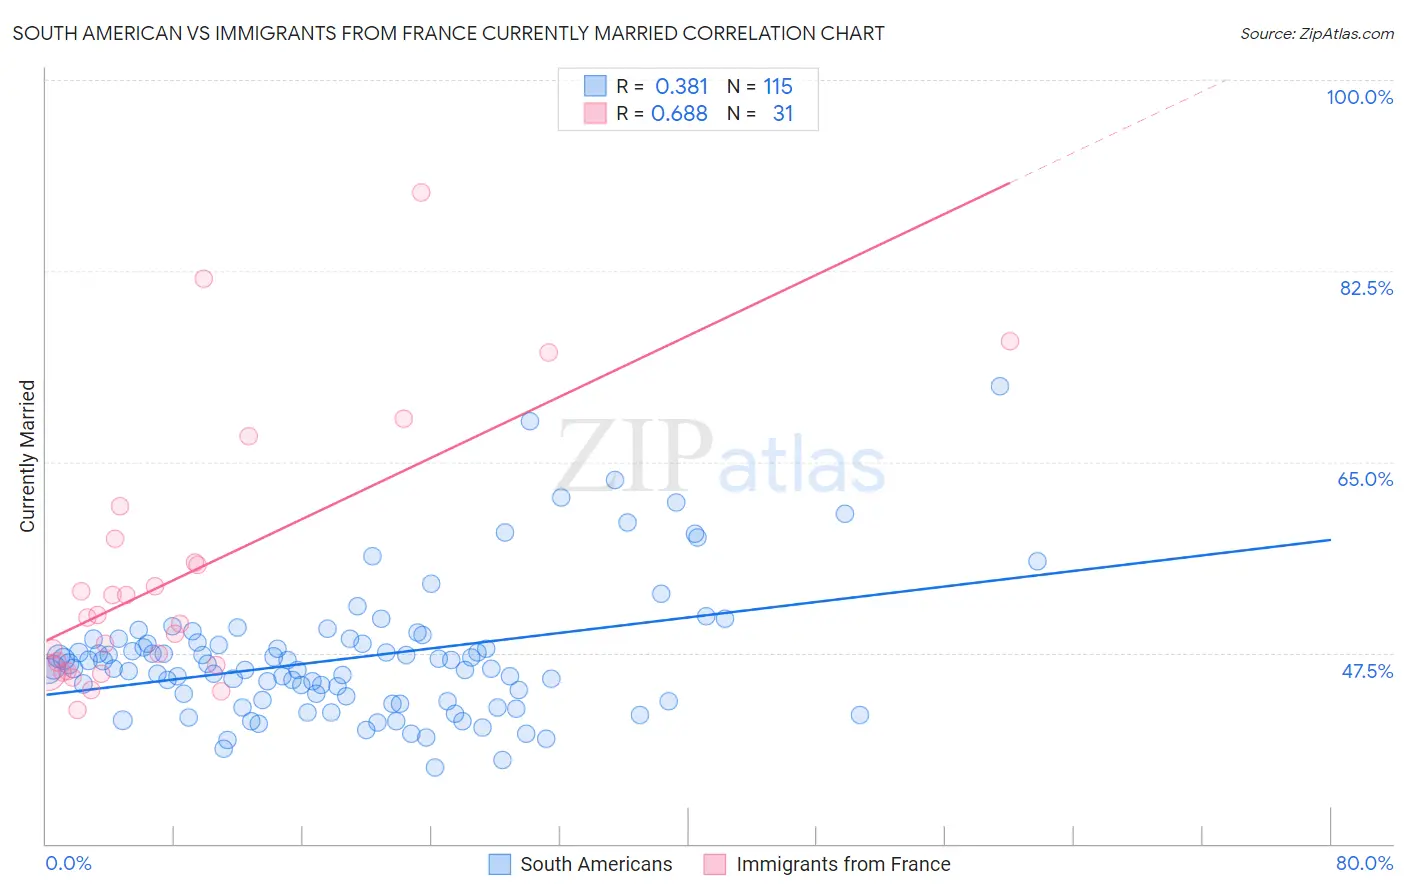 South American vs Immigrants from France Currently Married